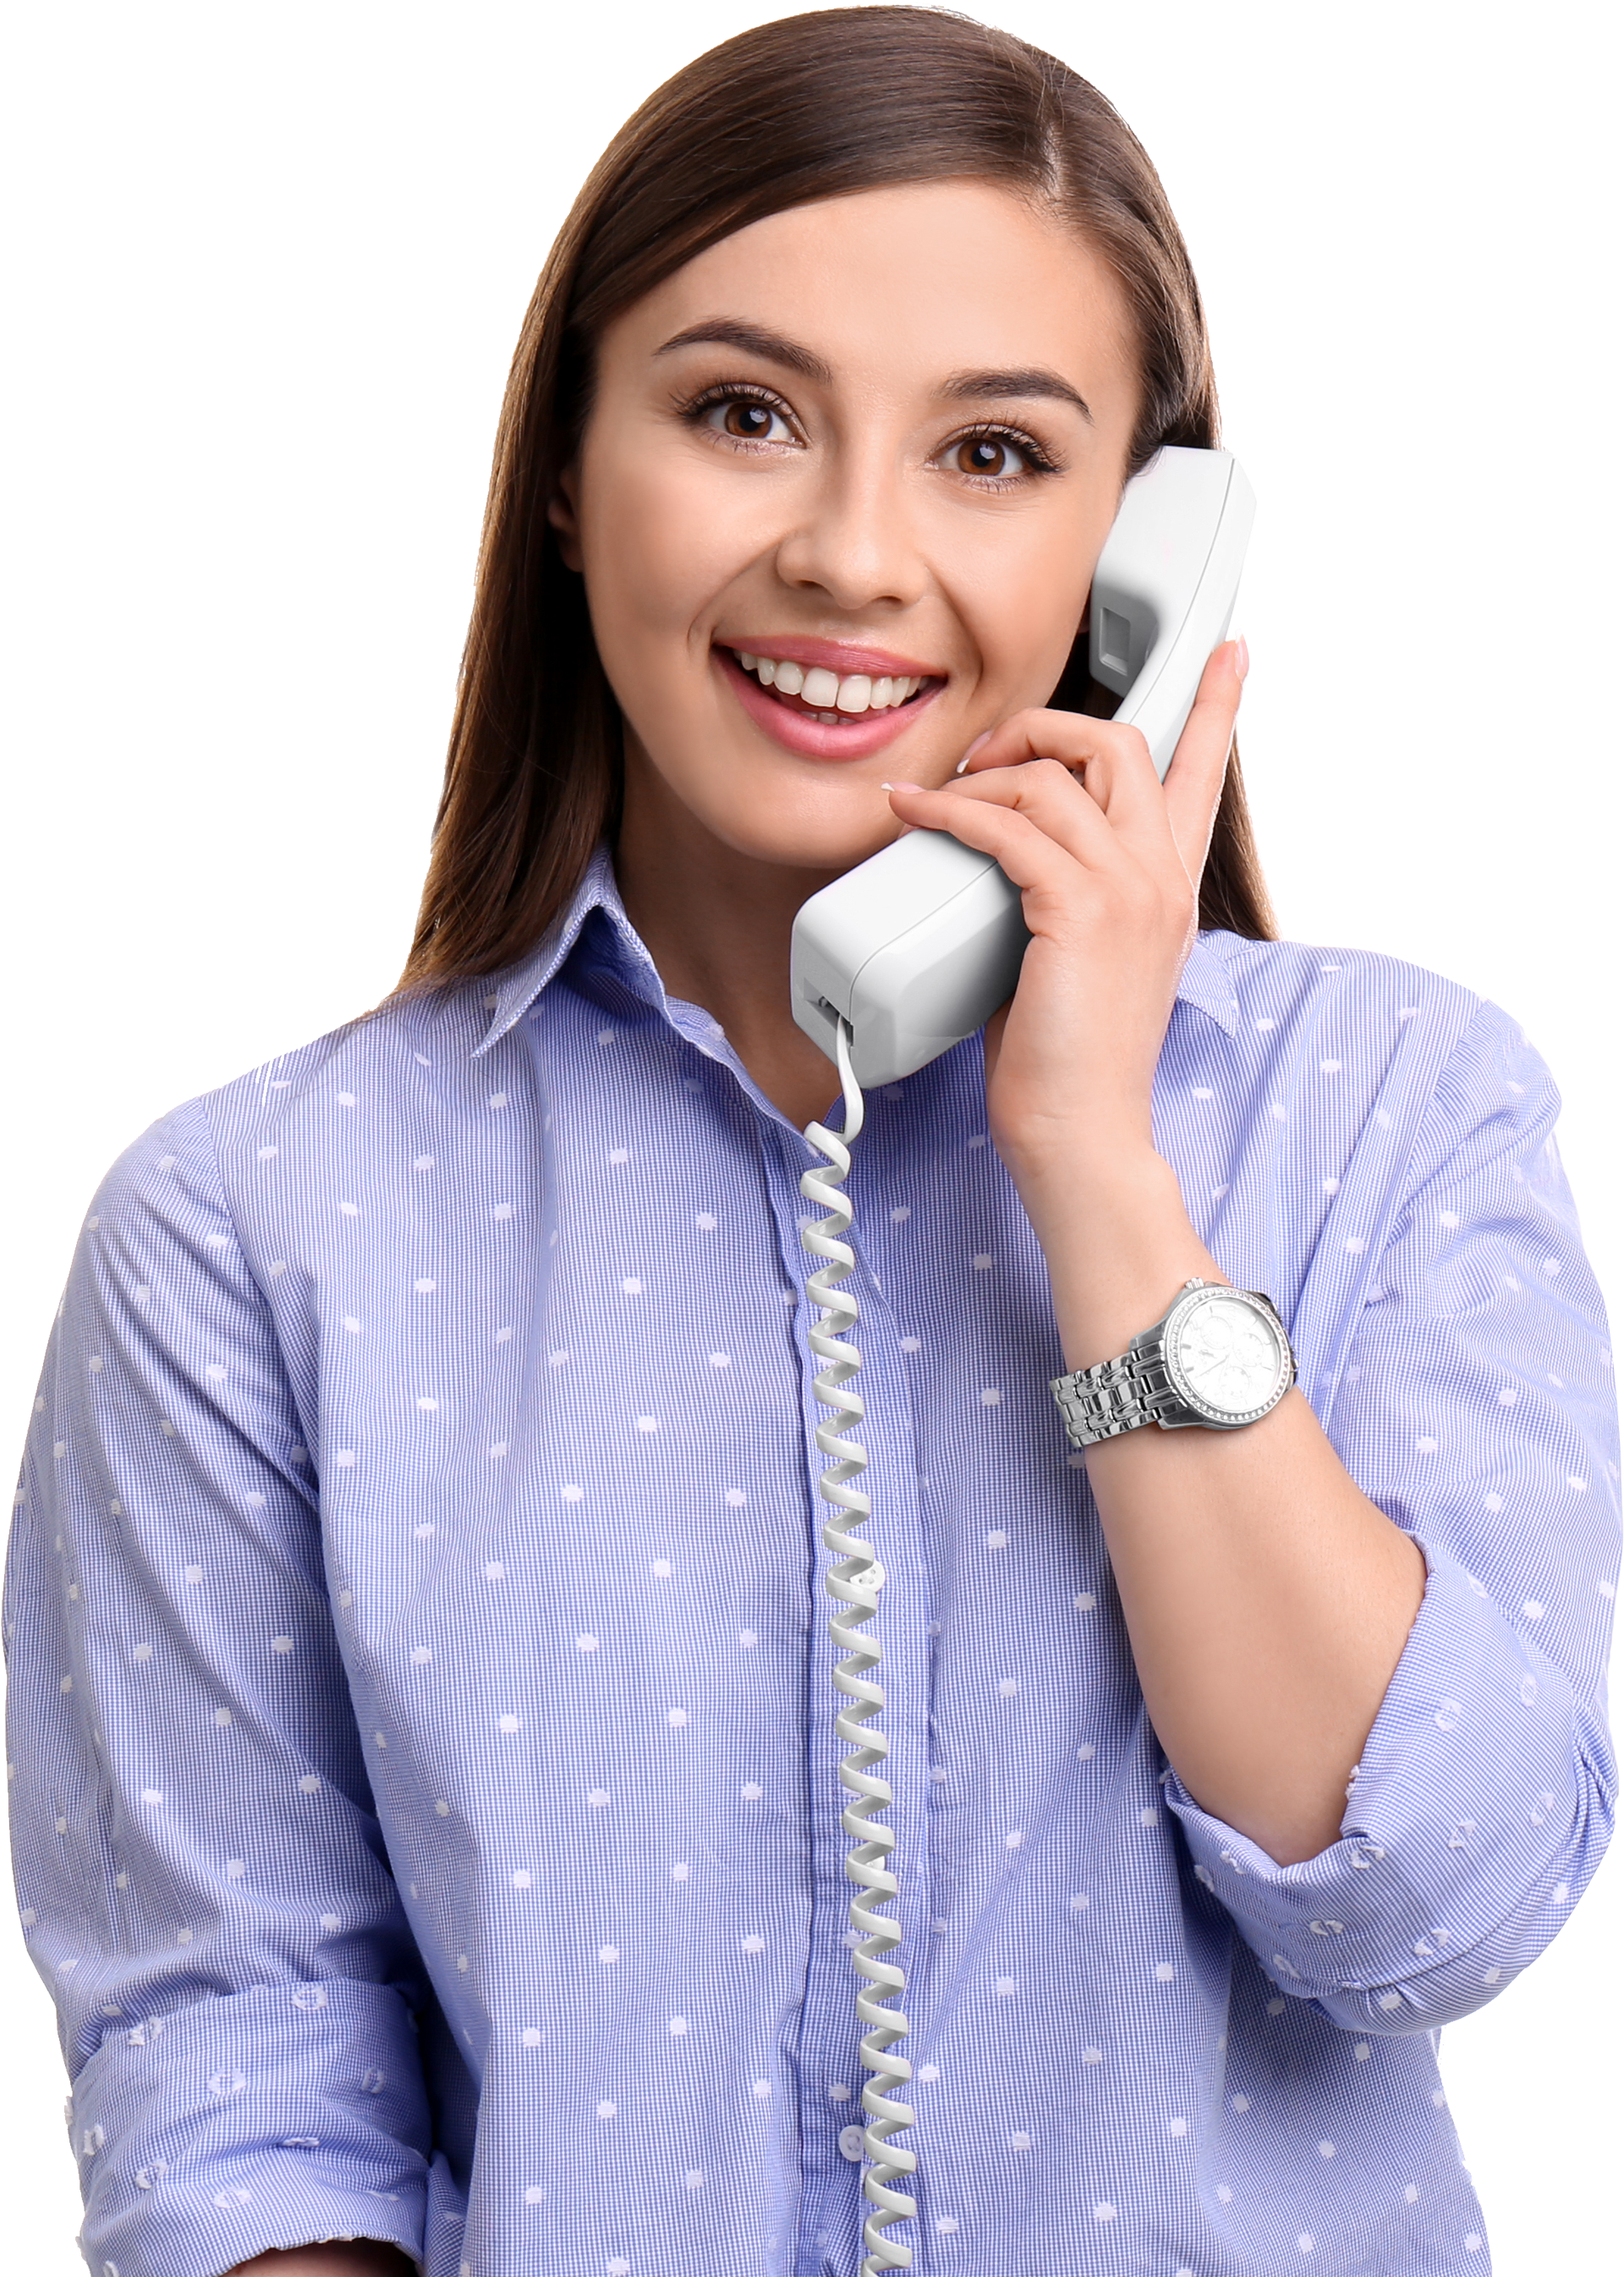 Woman Smiling While Talking on a Telephone